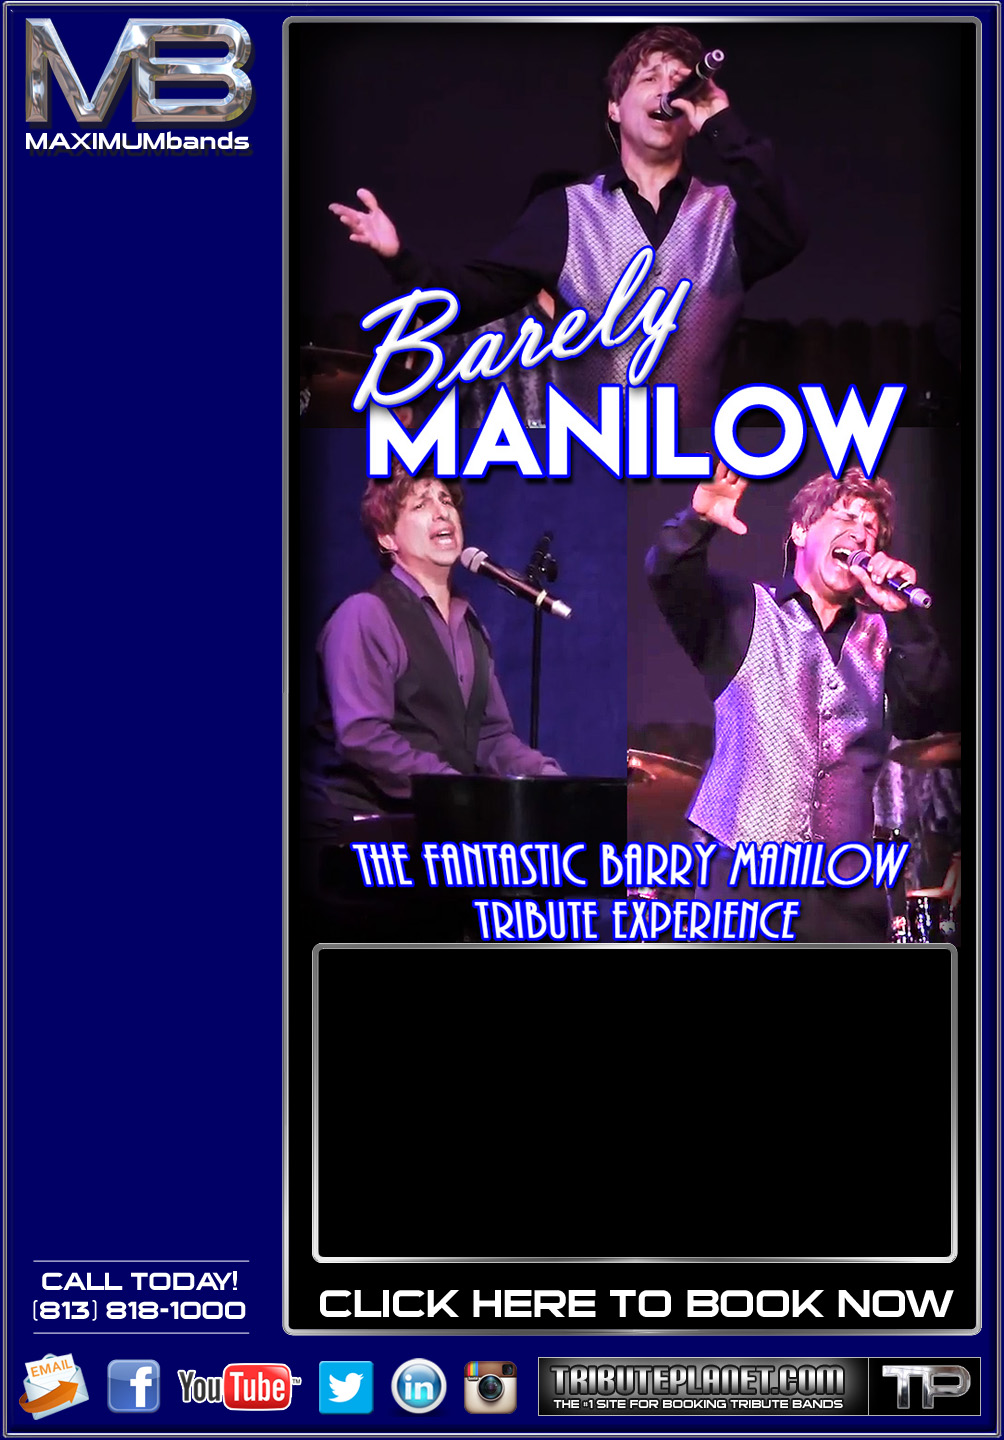 Barely Manilow Is The Ultimate Barry Manilow Tribute